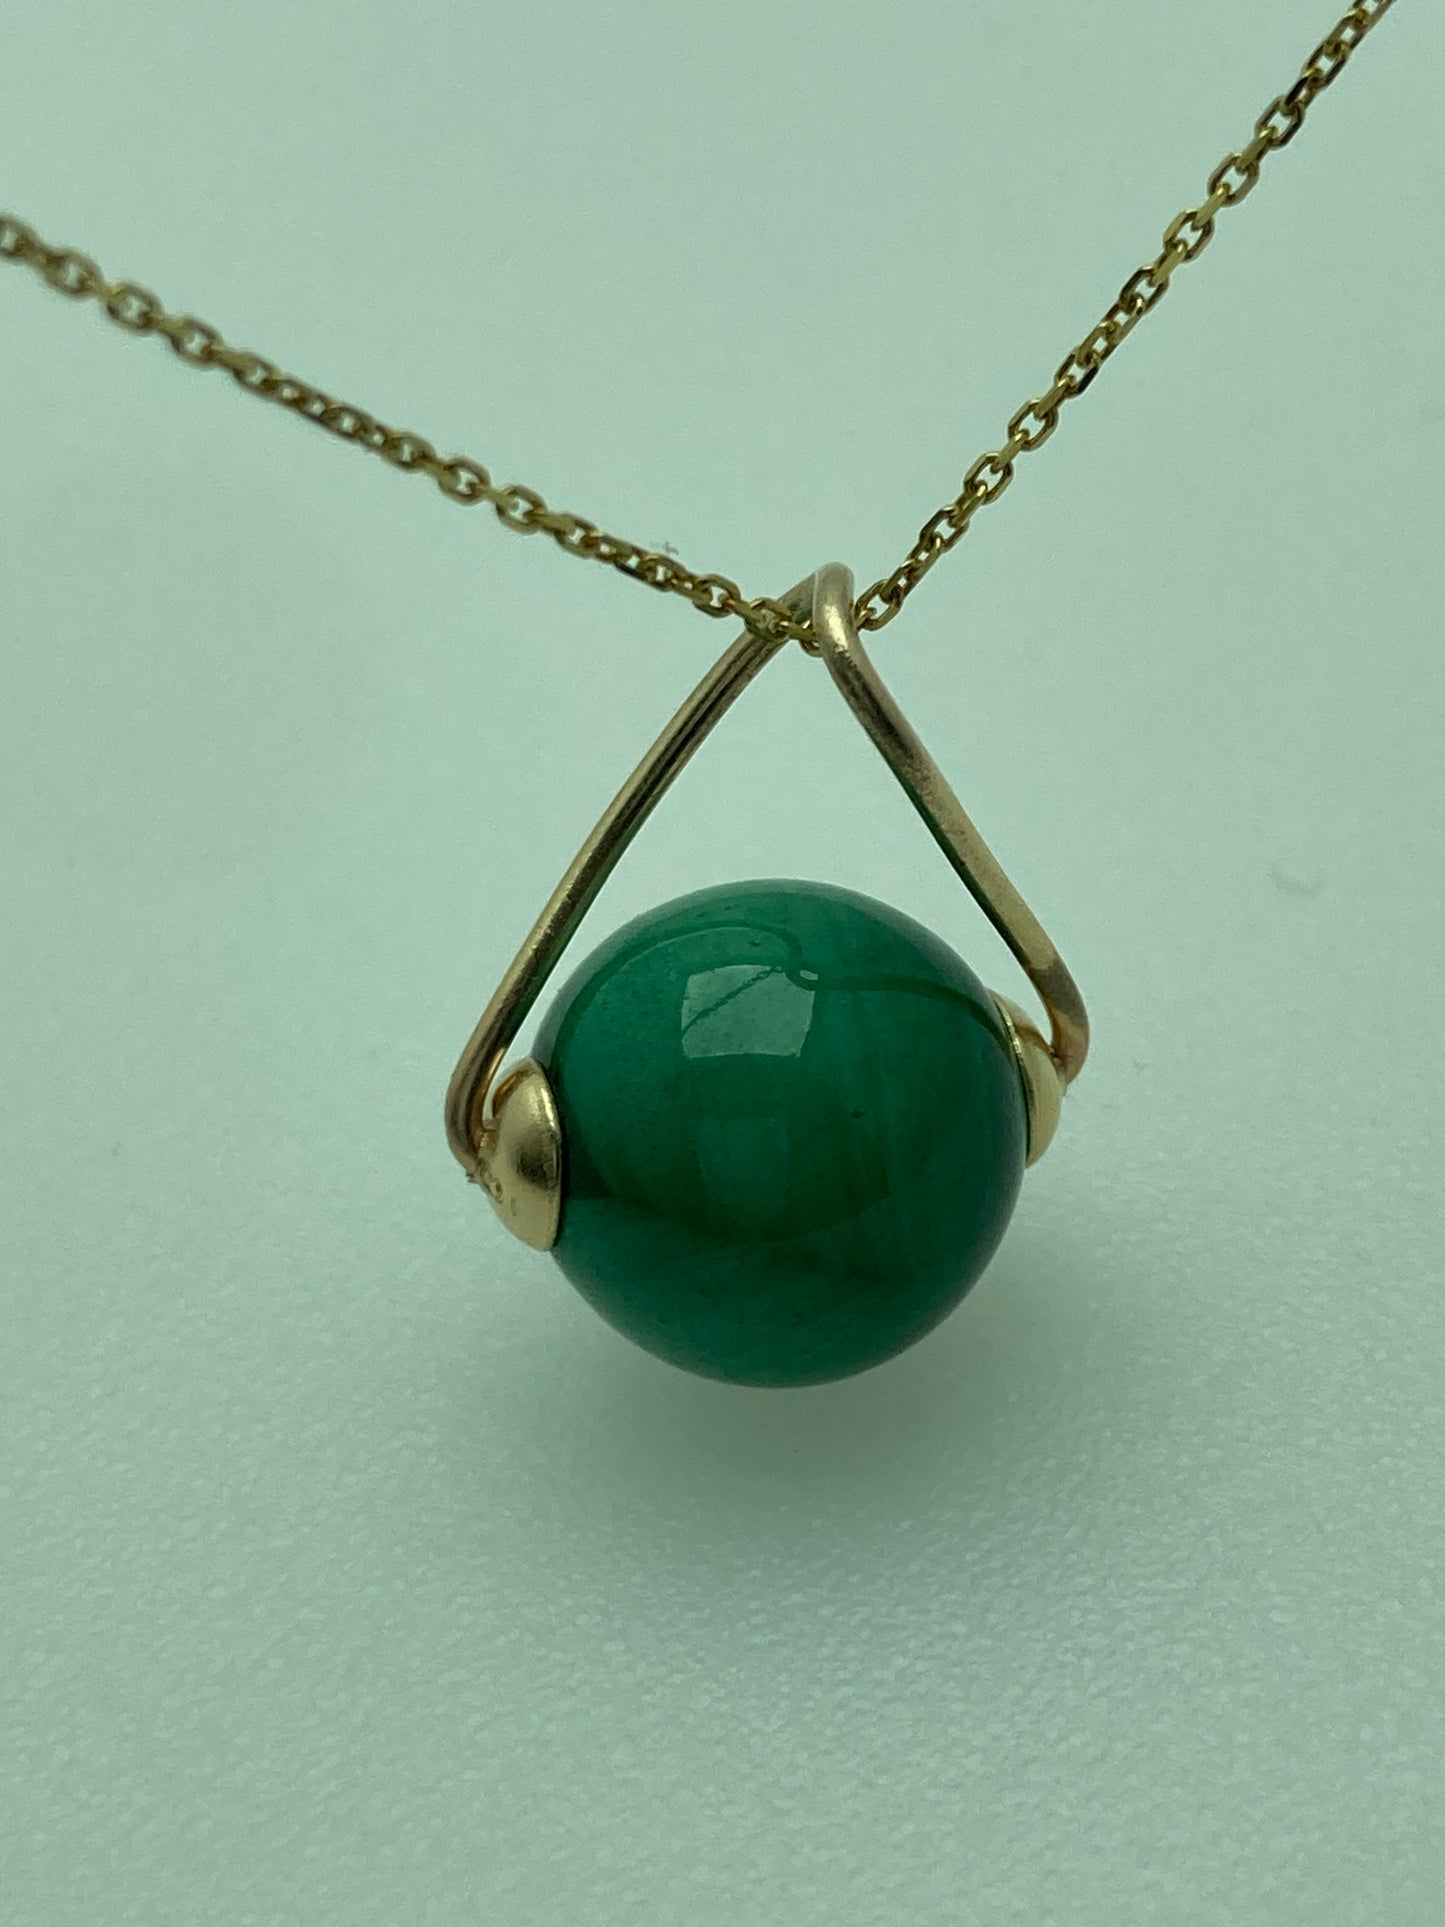 9ct gold Malachite necklace, solid 9ct yellow gold necklace, 18” gold chain